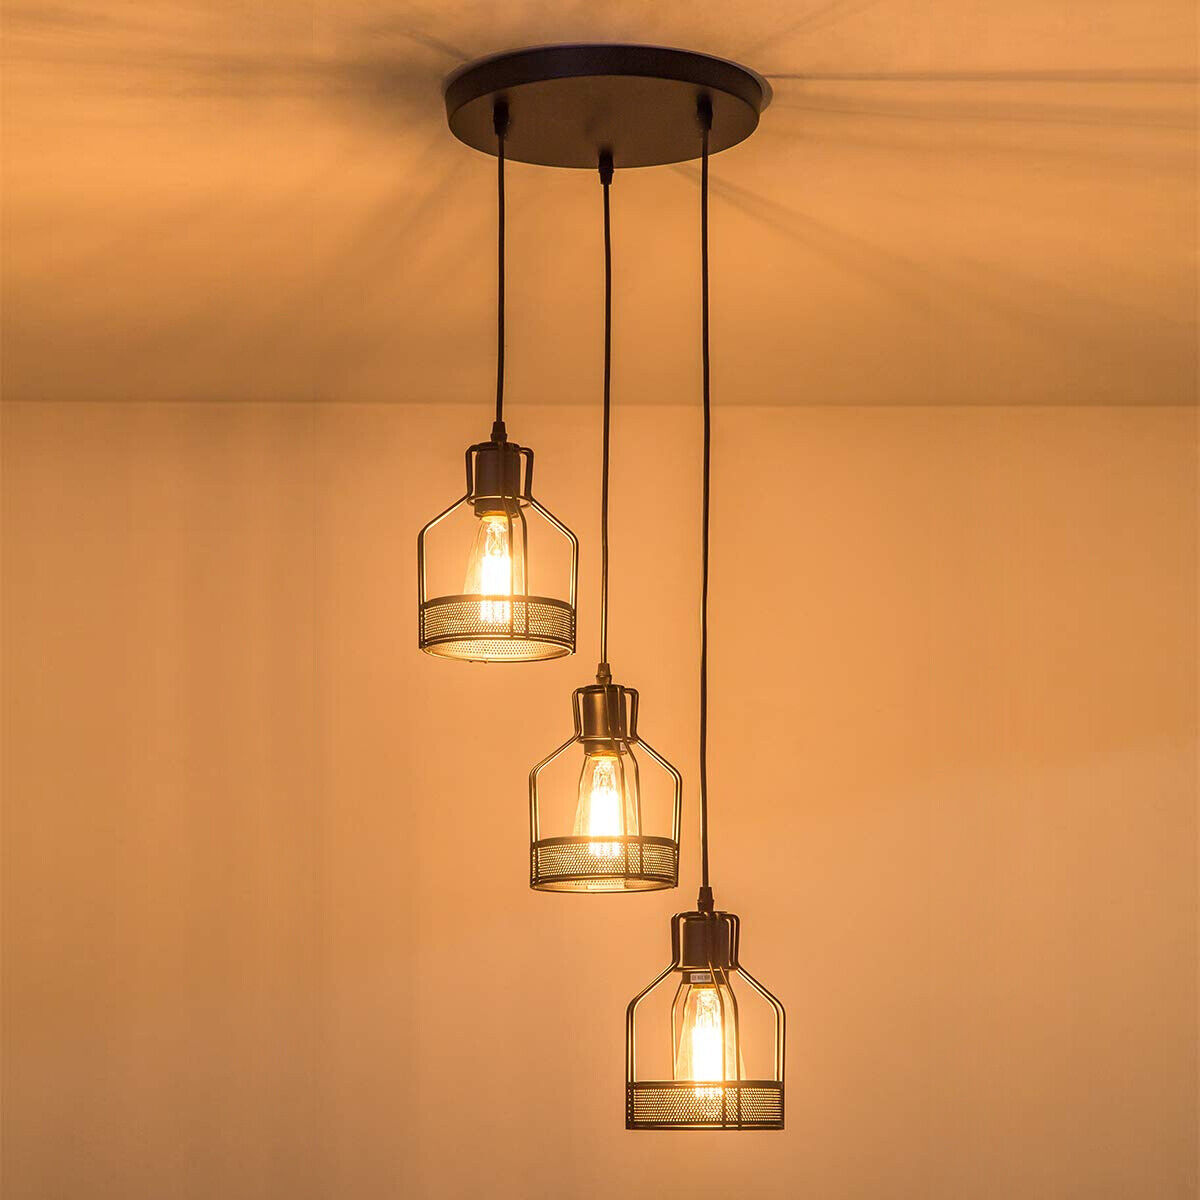 Modern 3 Way Ceiling Pendant Cluster Light Fitting Bird Cage Style